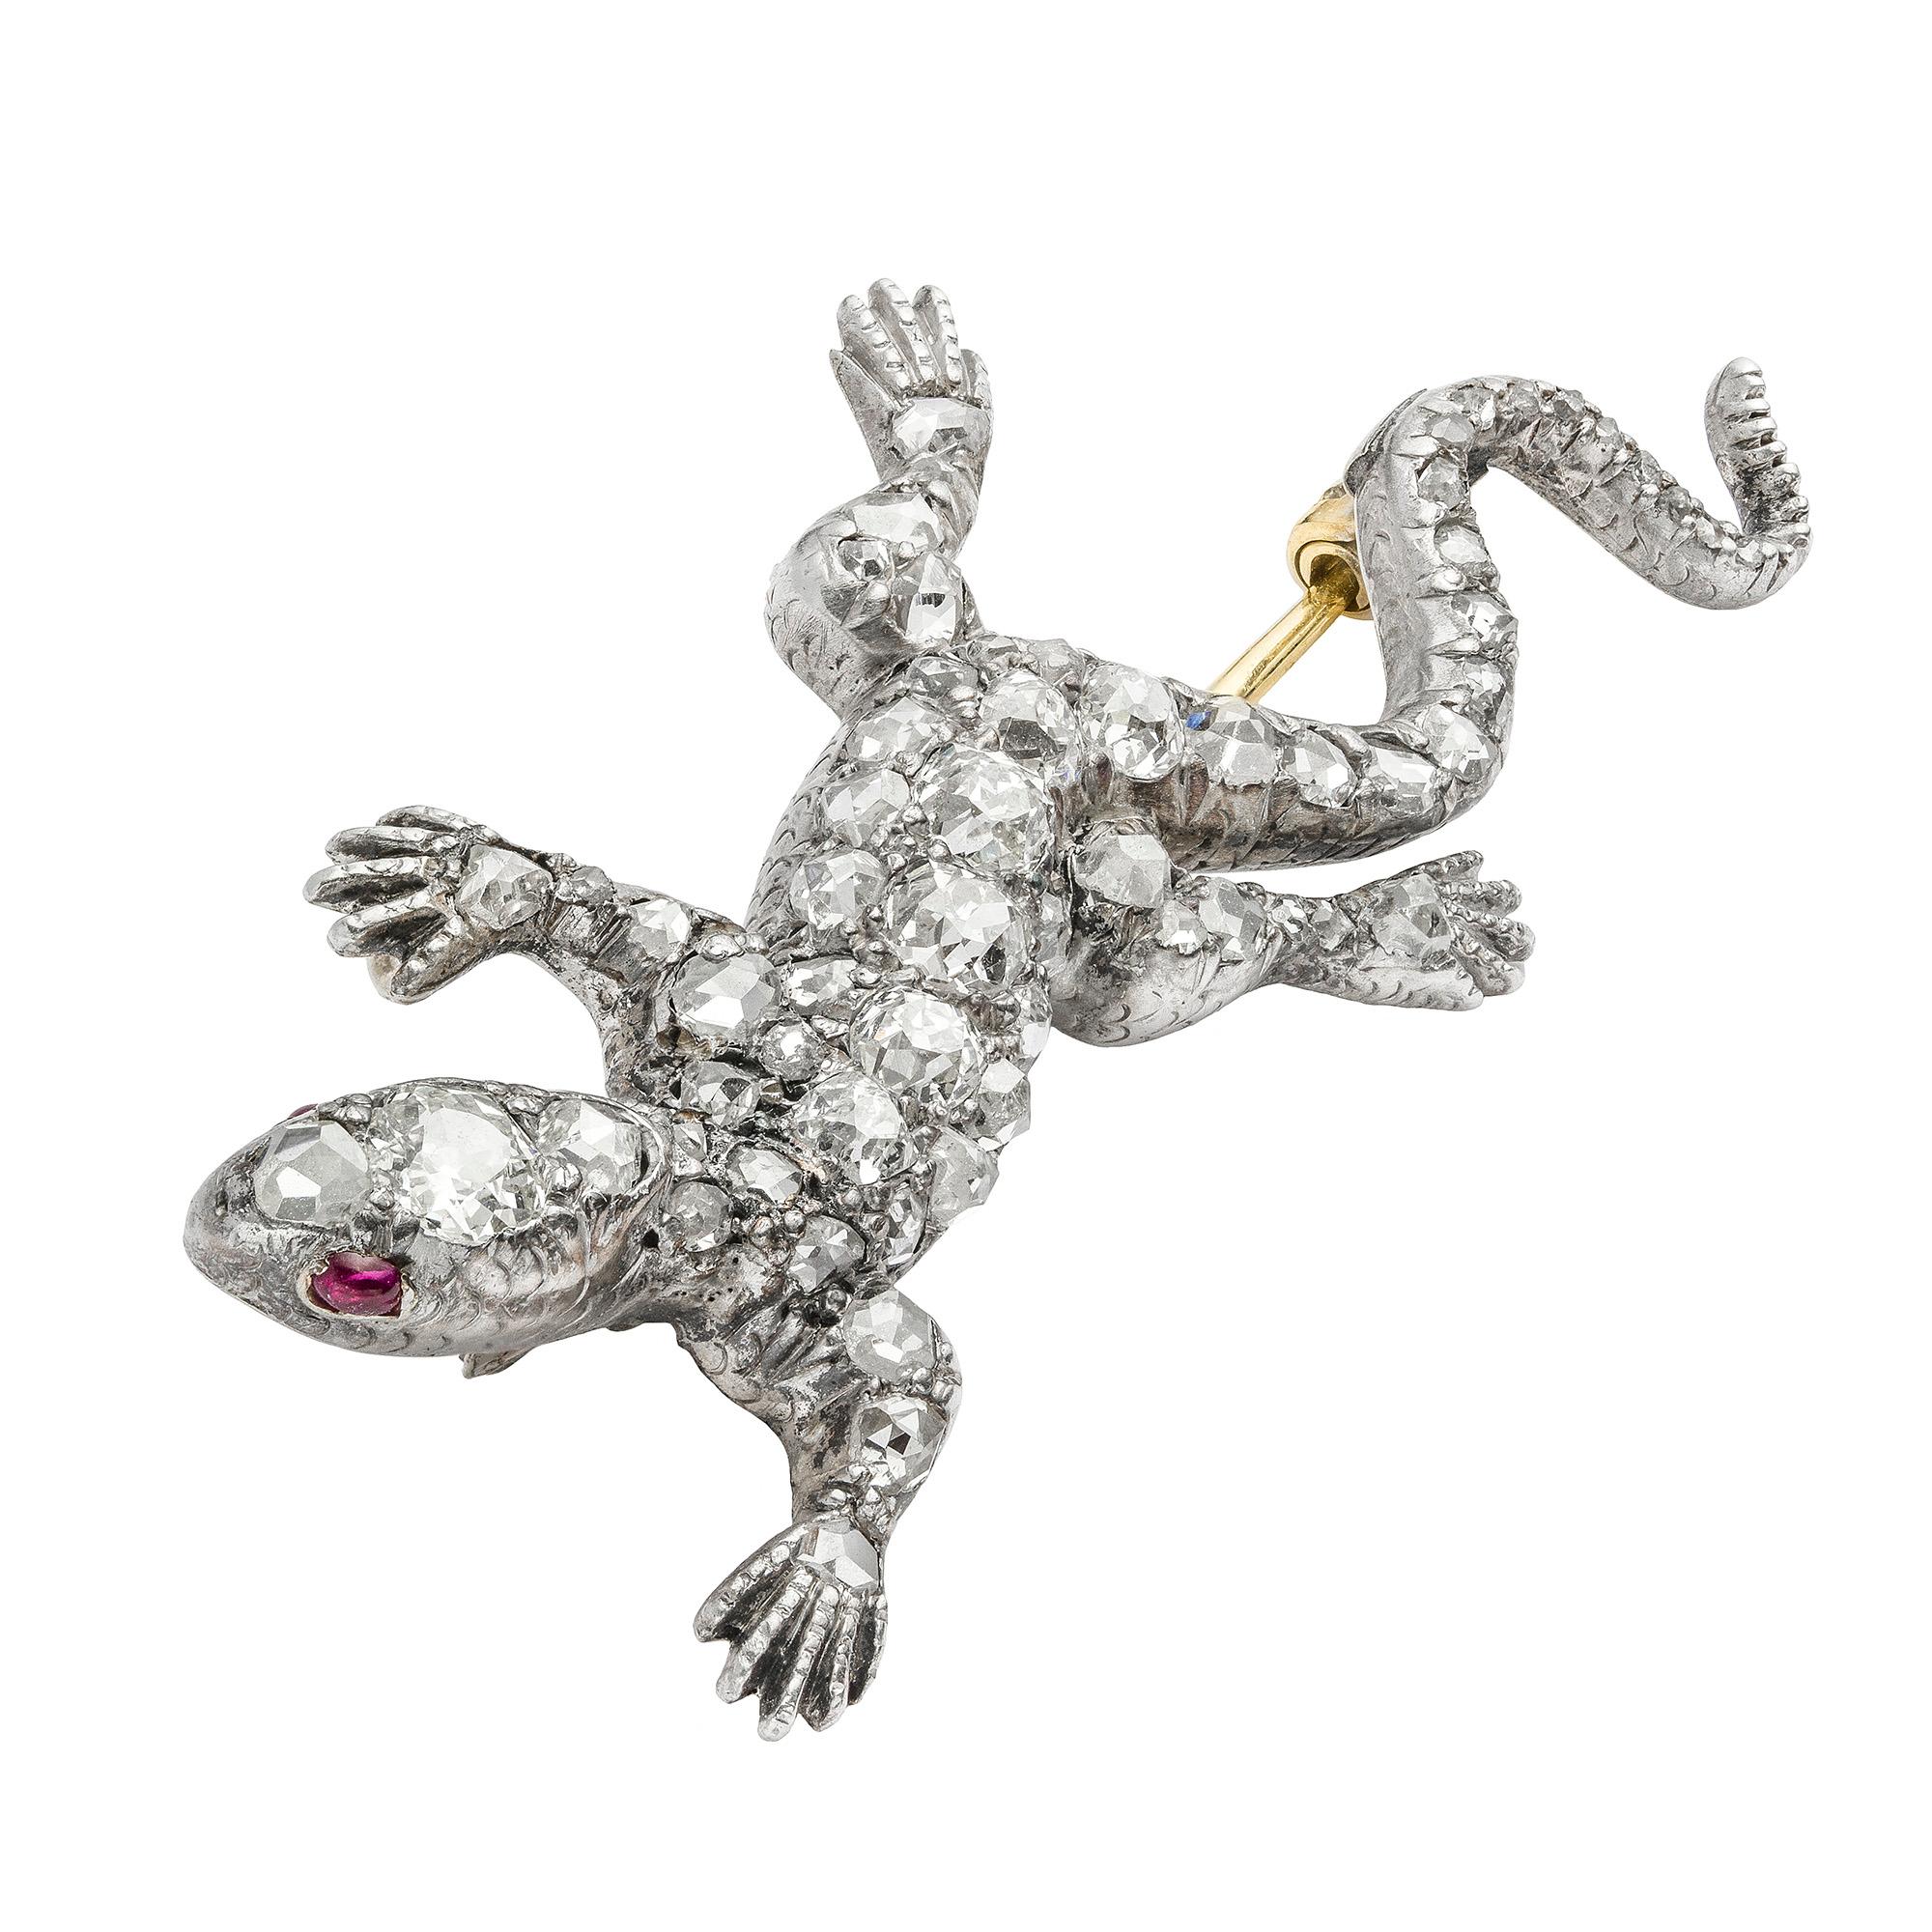 A Victorian diamond set lizard brooch, in the form of a lizard in motion, set throughout with old European and rose-cut diamonds with the largest to the head, the diamonds estimated to weigh 1 carat in total, the eyes set with cabochon-cut rubies,